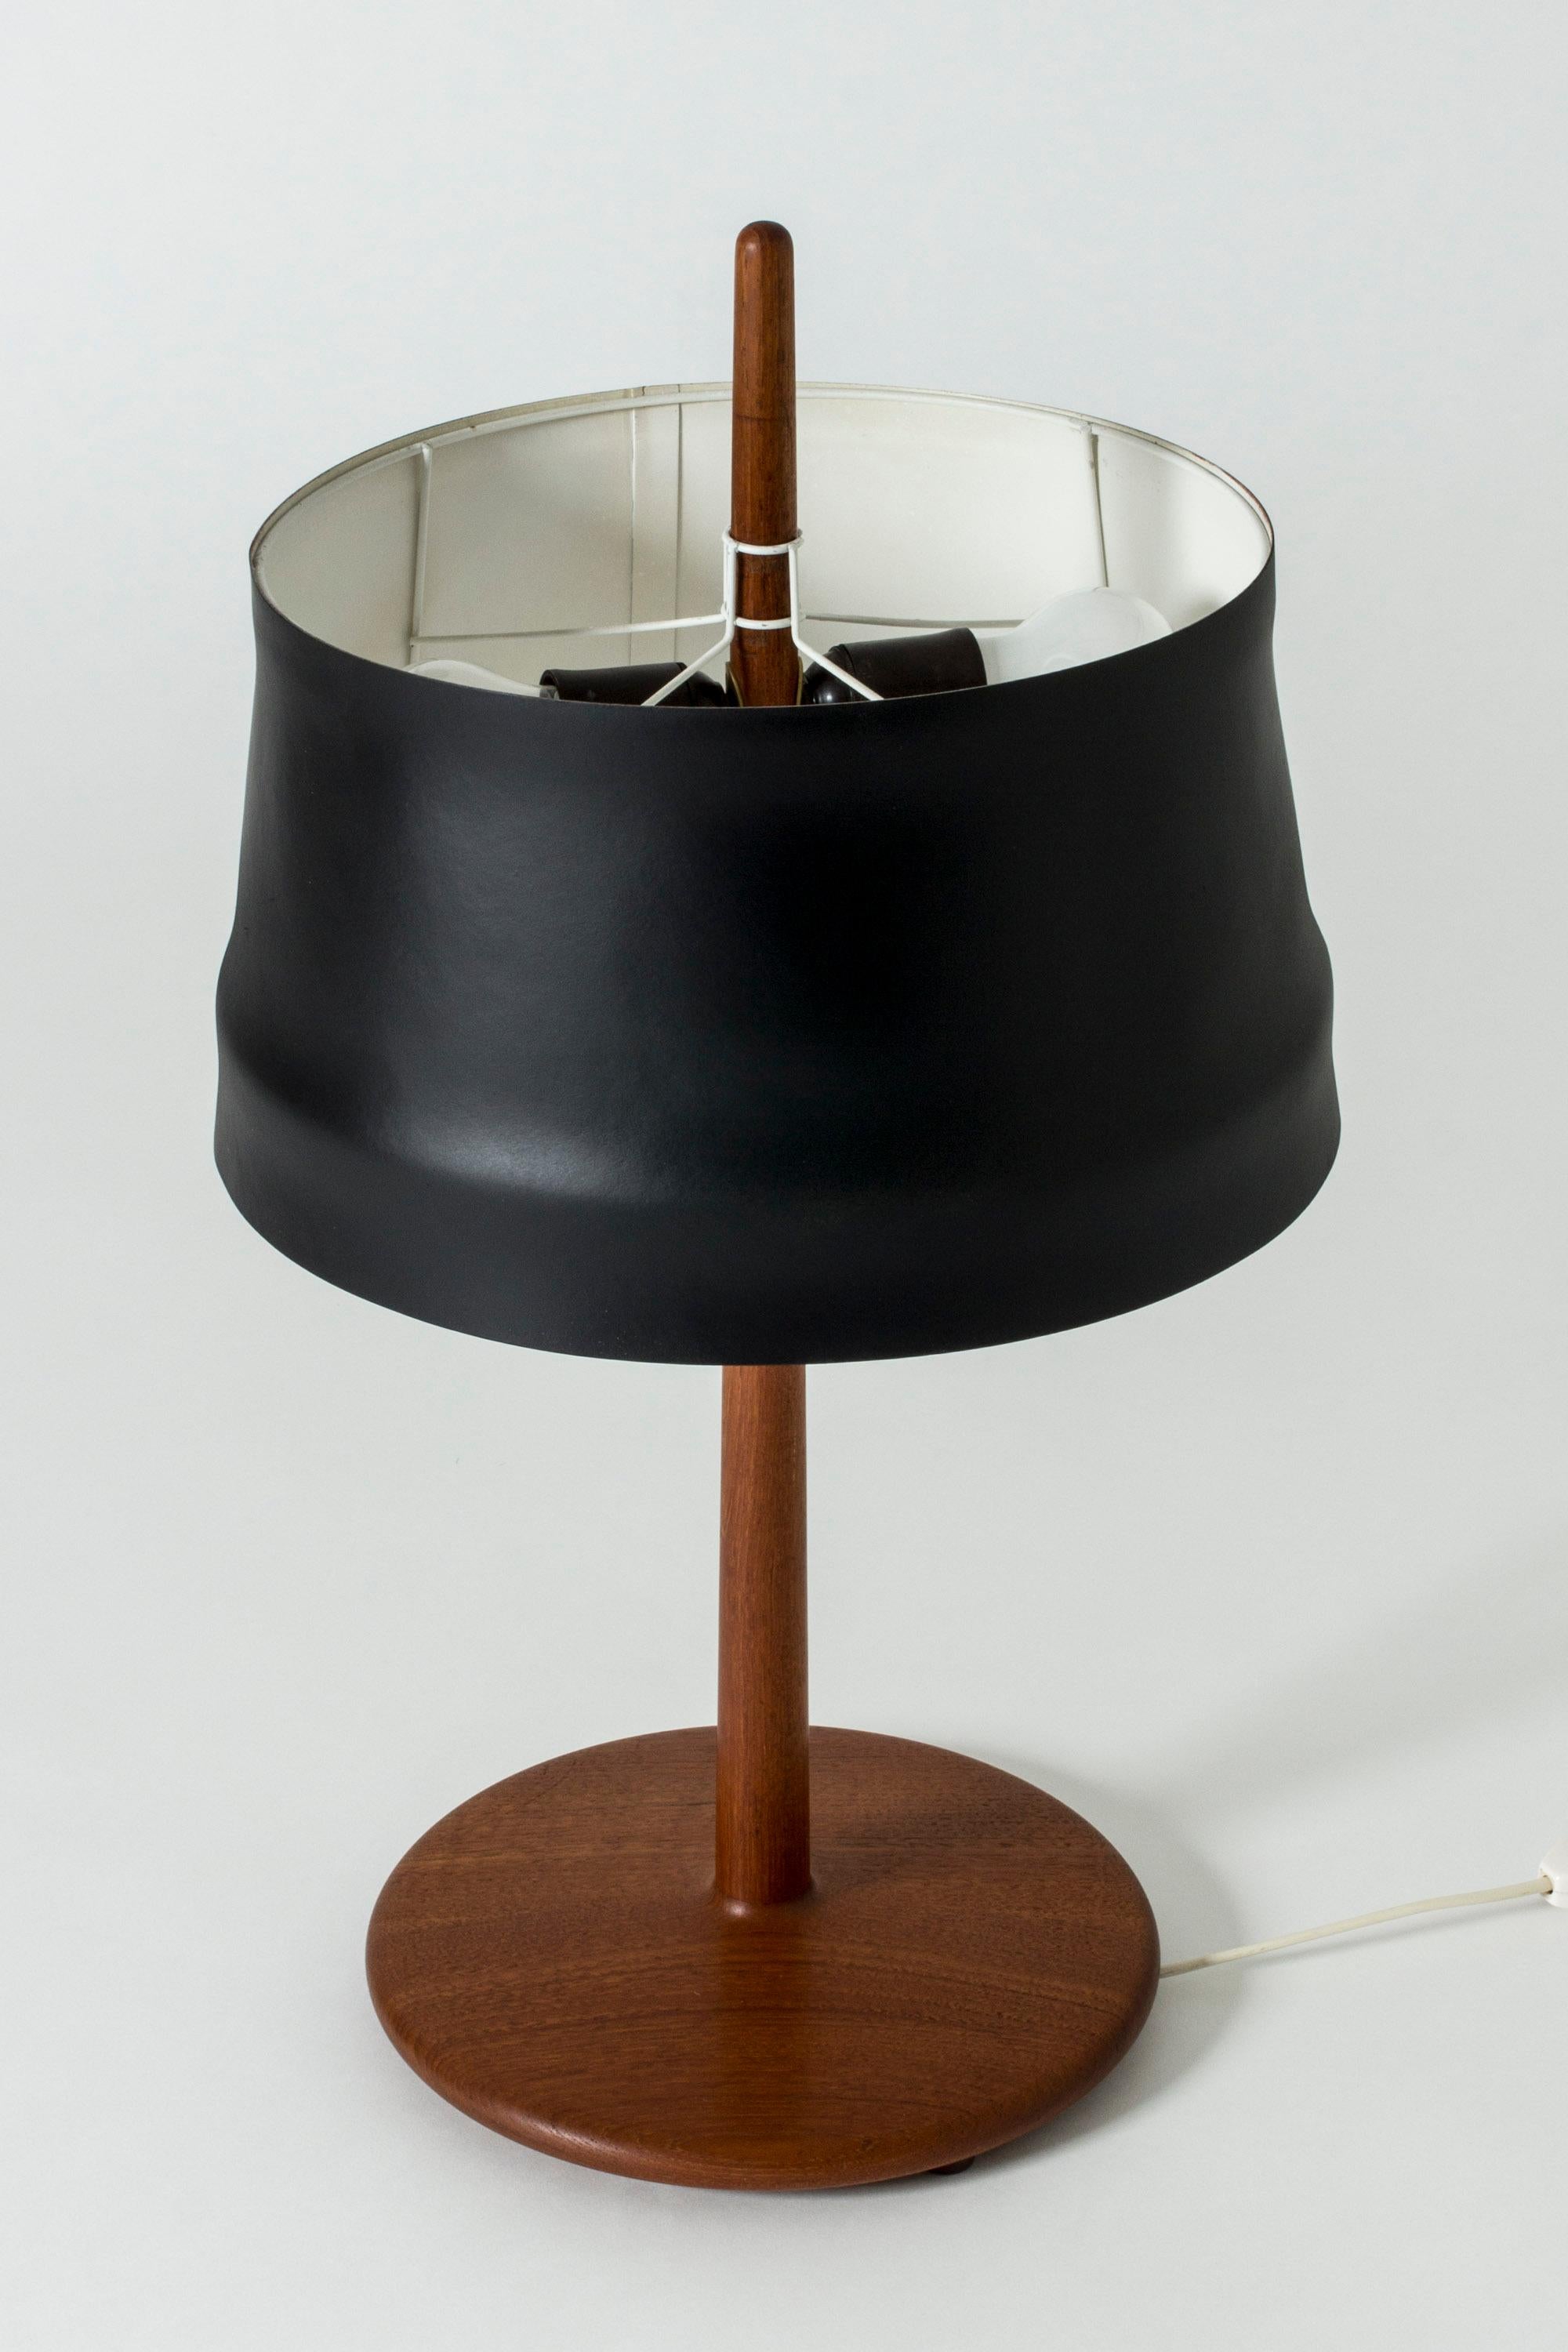 Cool table lamp by Alf Svensson, with a teak base and stem, where the tip of the stem shoots up out of the top of the open shade. Very nice, smooth teak in a streamlined shape. Lacquered black metal shade.